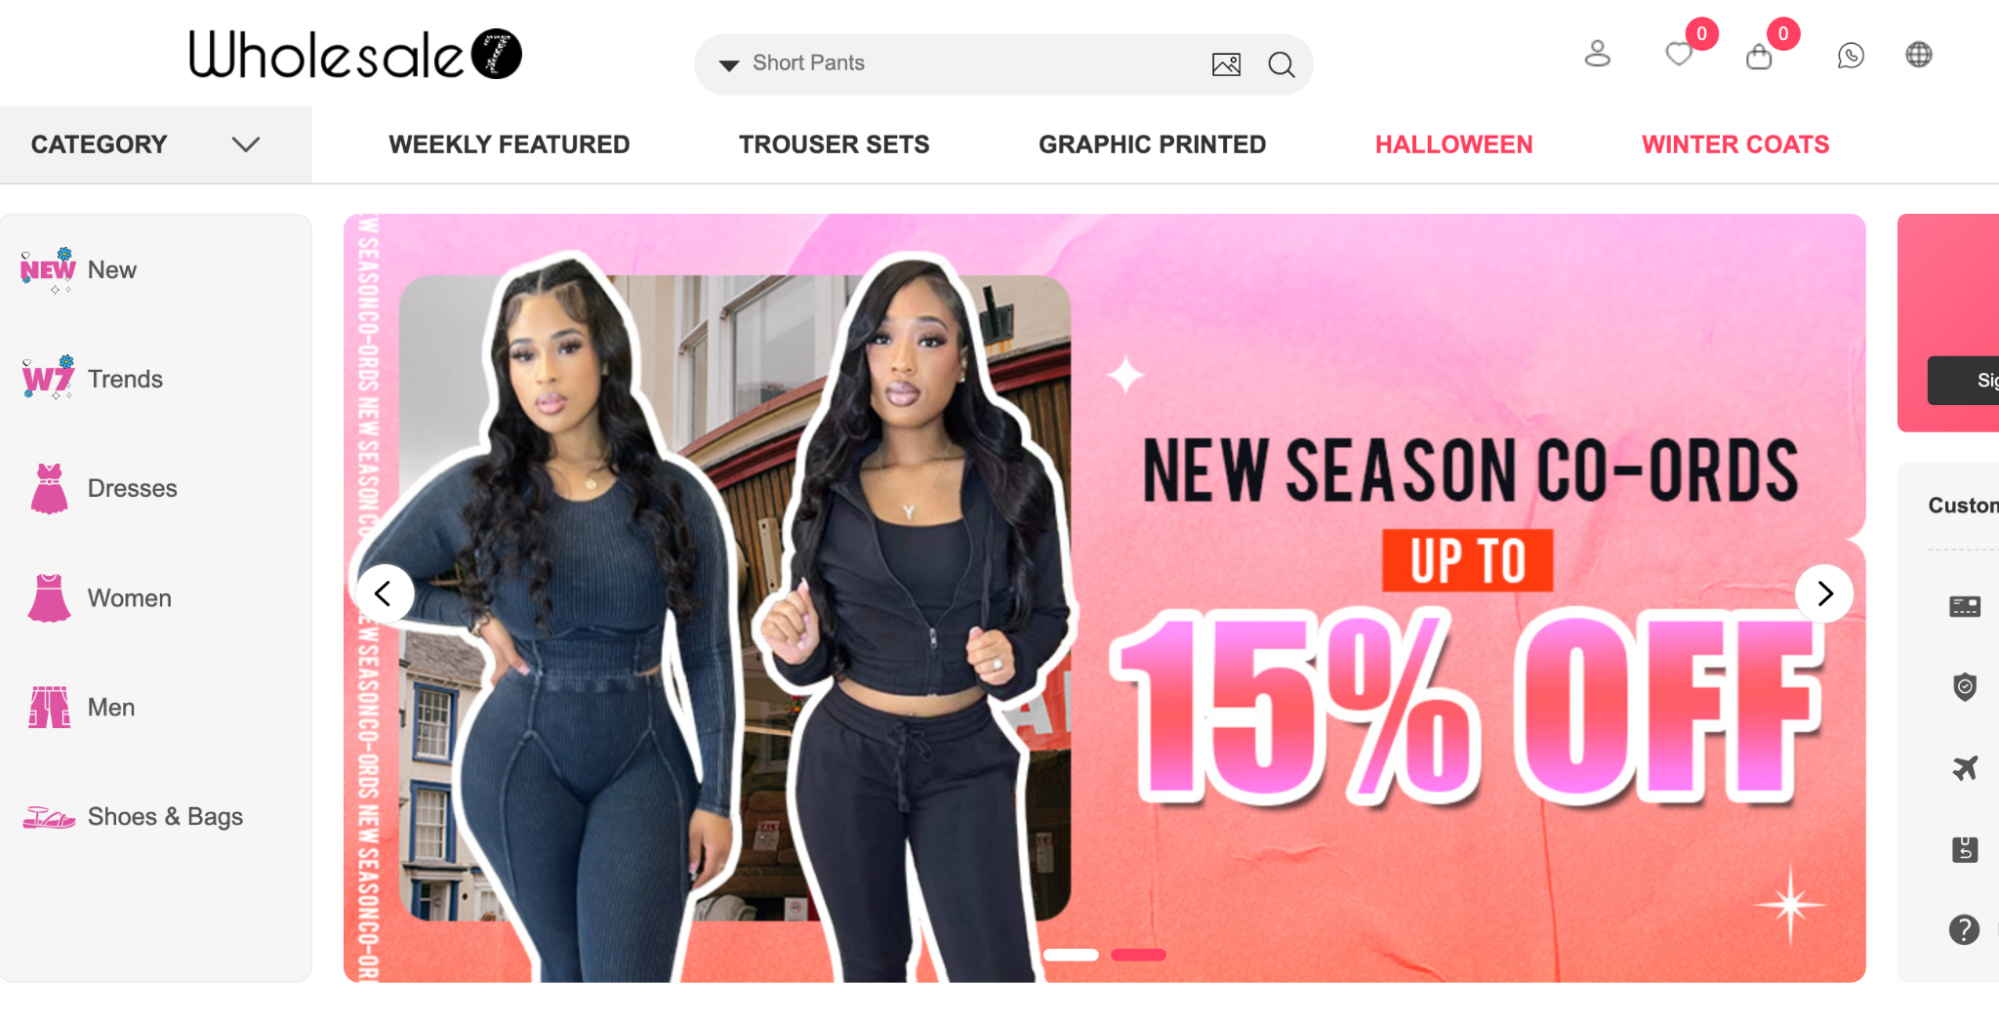 Image of Wholesale7 homepage sporting a 15% off discount